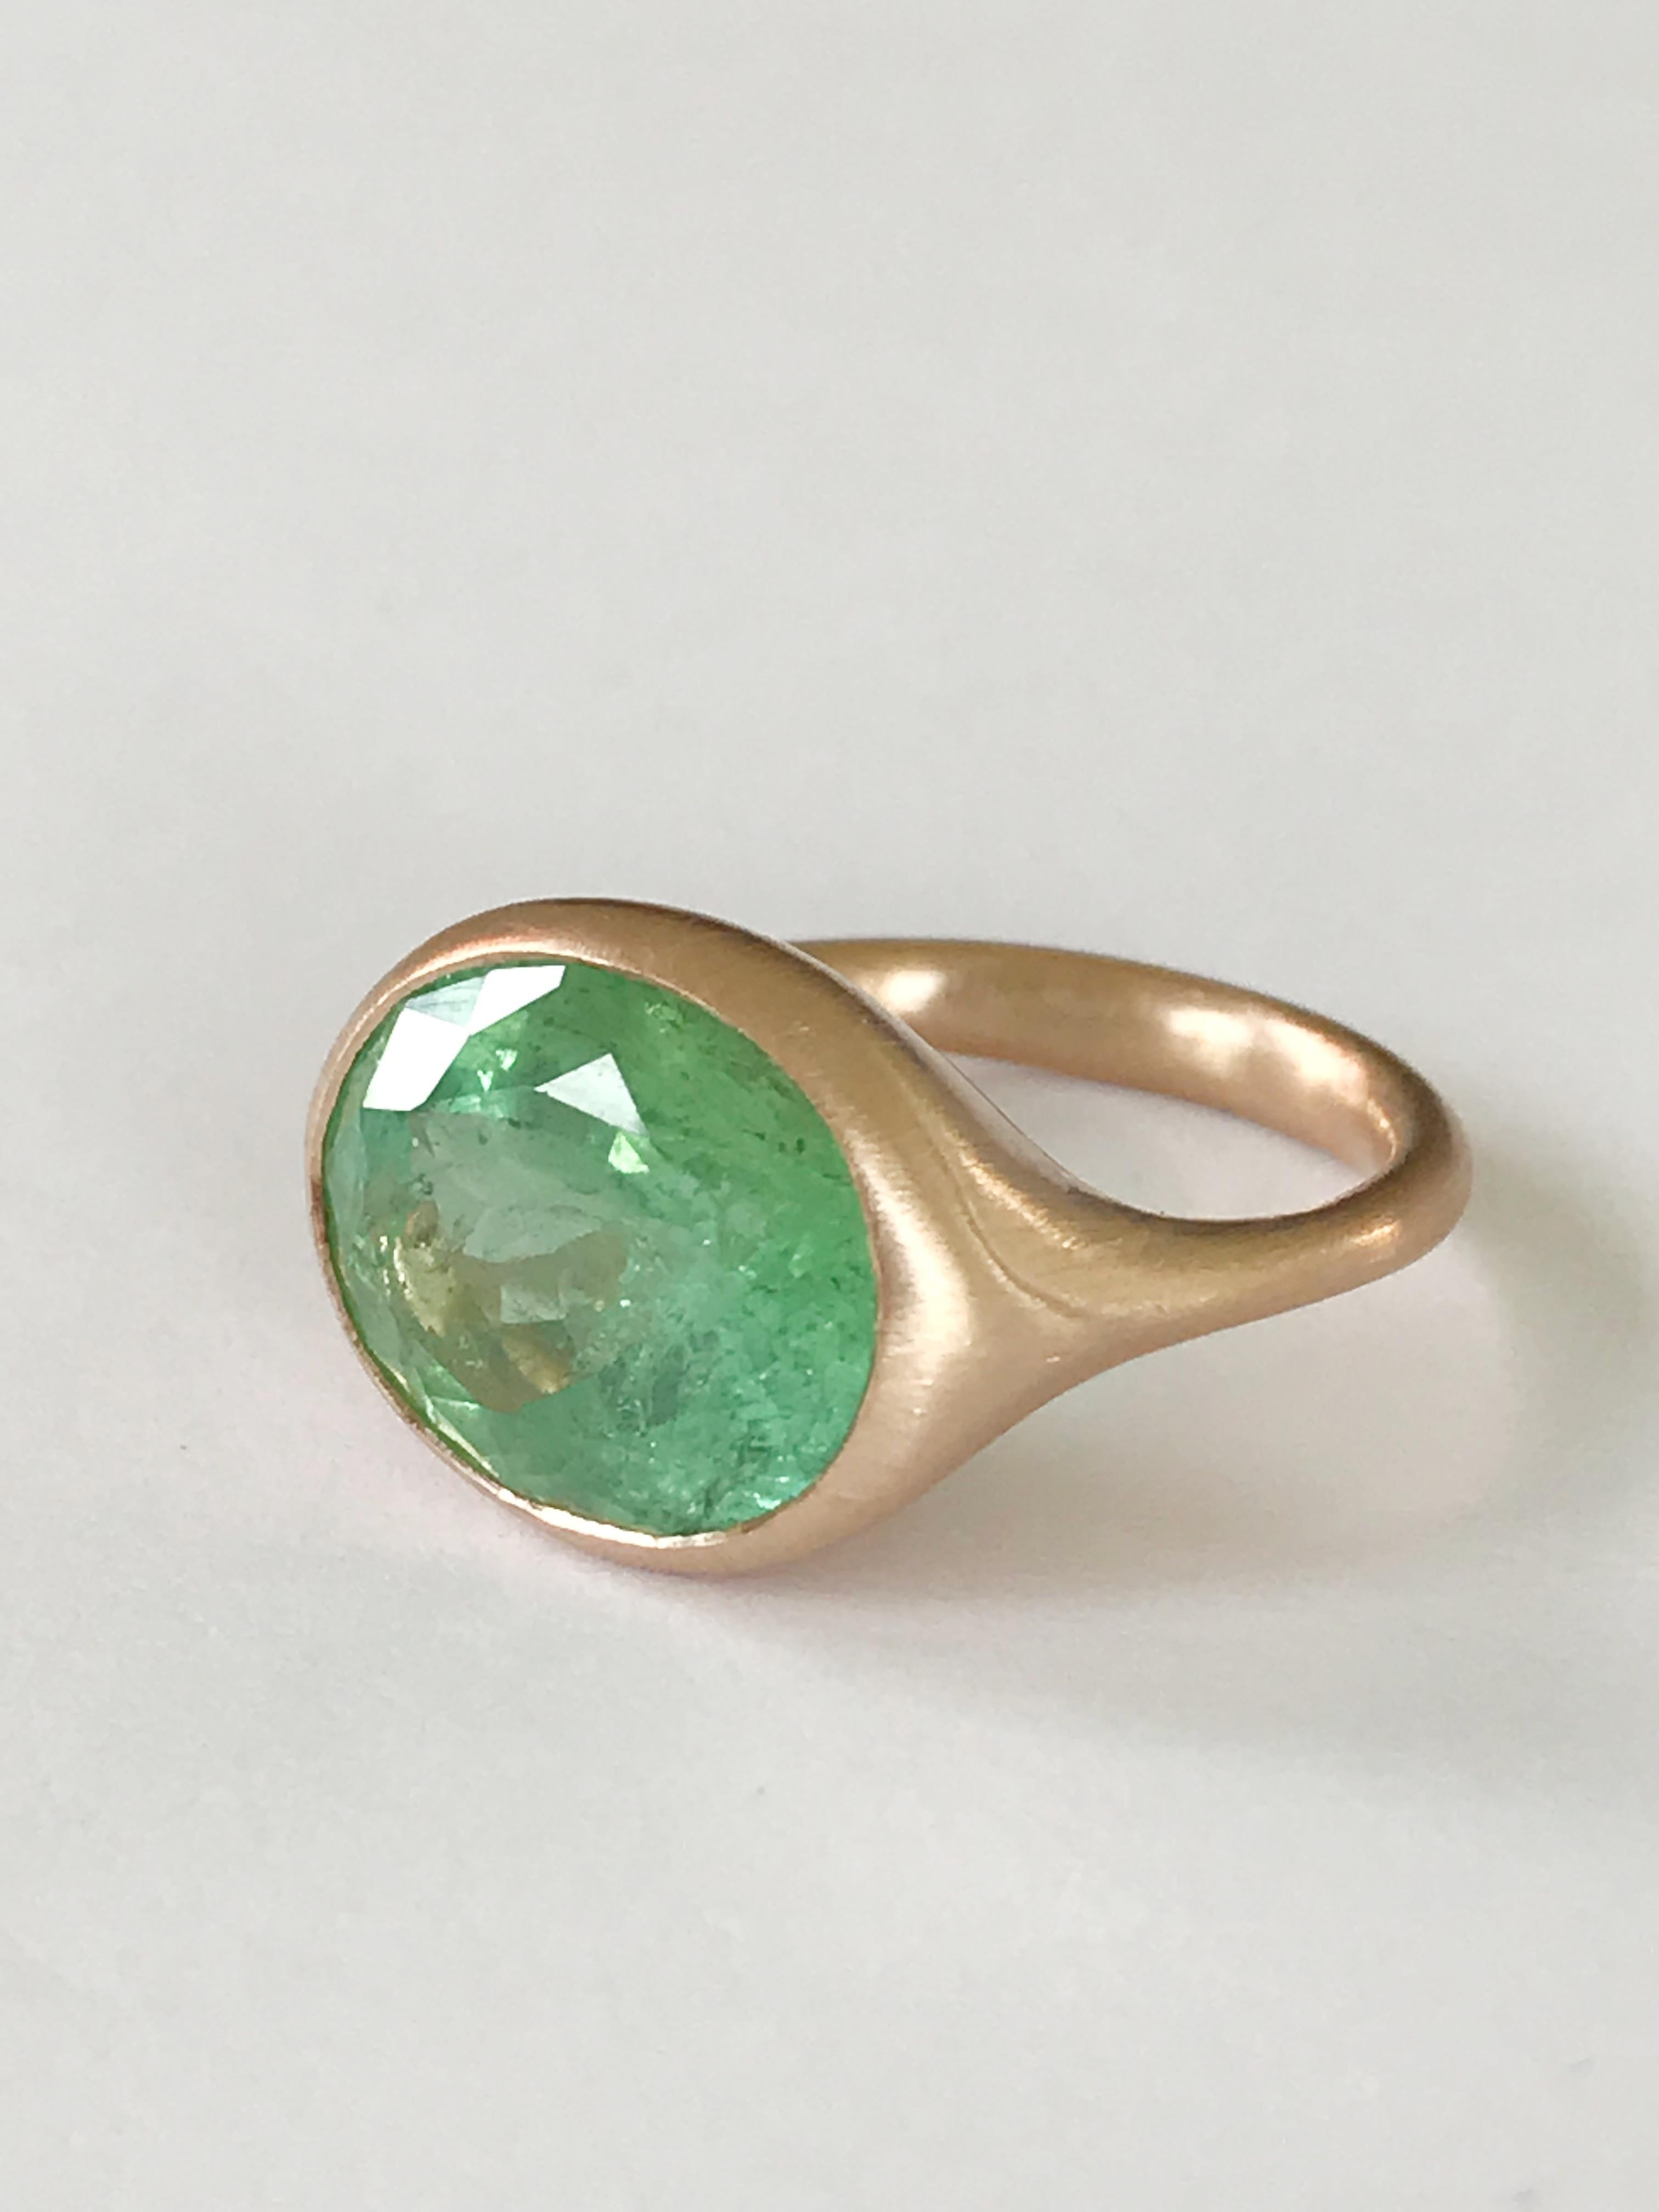 Dalben design  18k rose gold matte finishing ring with a light green 7,29 carat bezel-set oval faceted cut Tourmaline. 
The tourmaline have some  natural inclusions.
Ring size 7 1/4 USA - EU 55 re-sizable to most finger sizes. 
Bezel stone